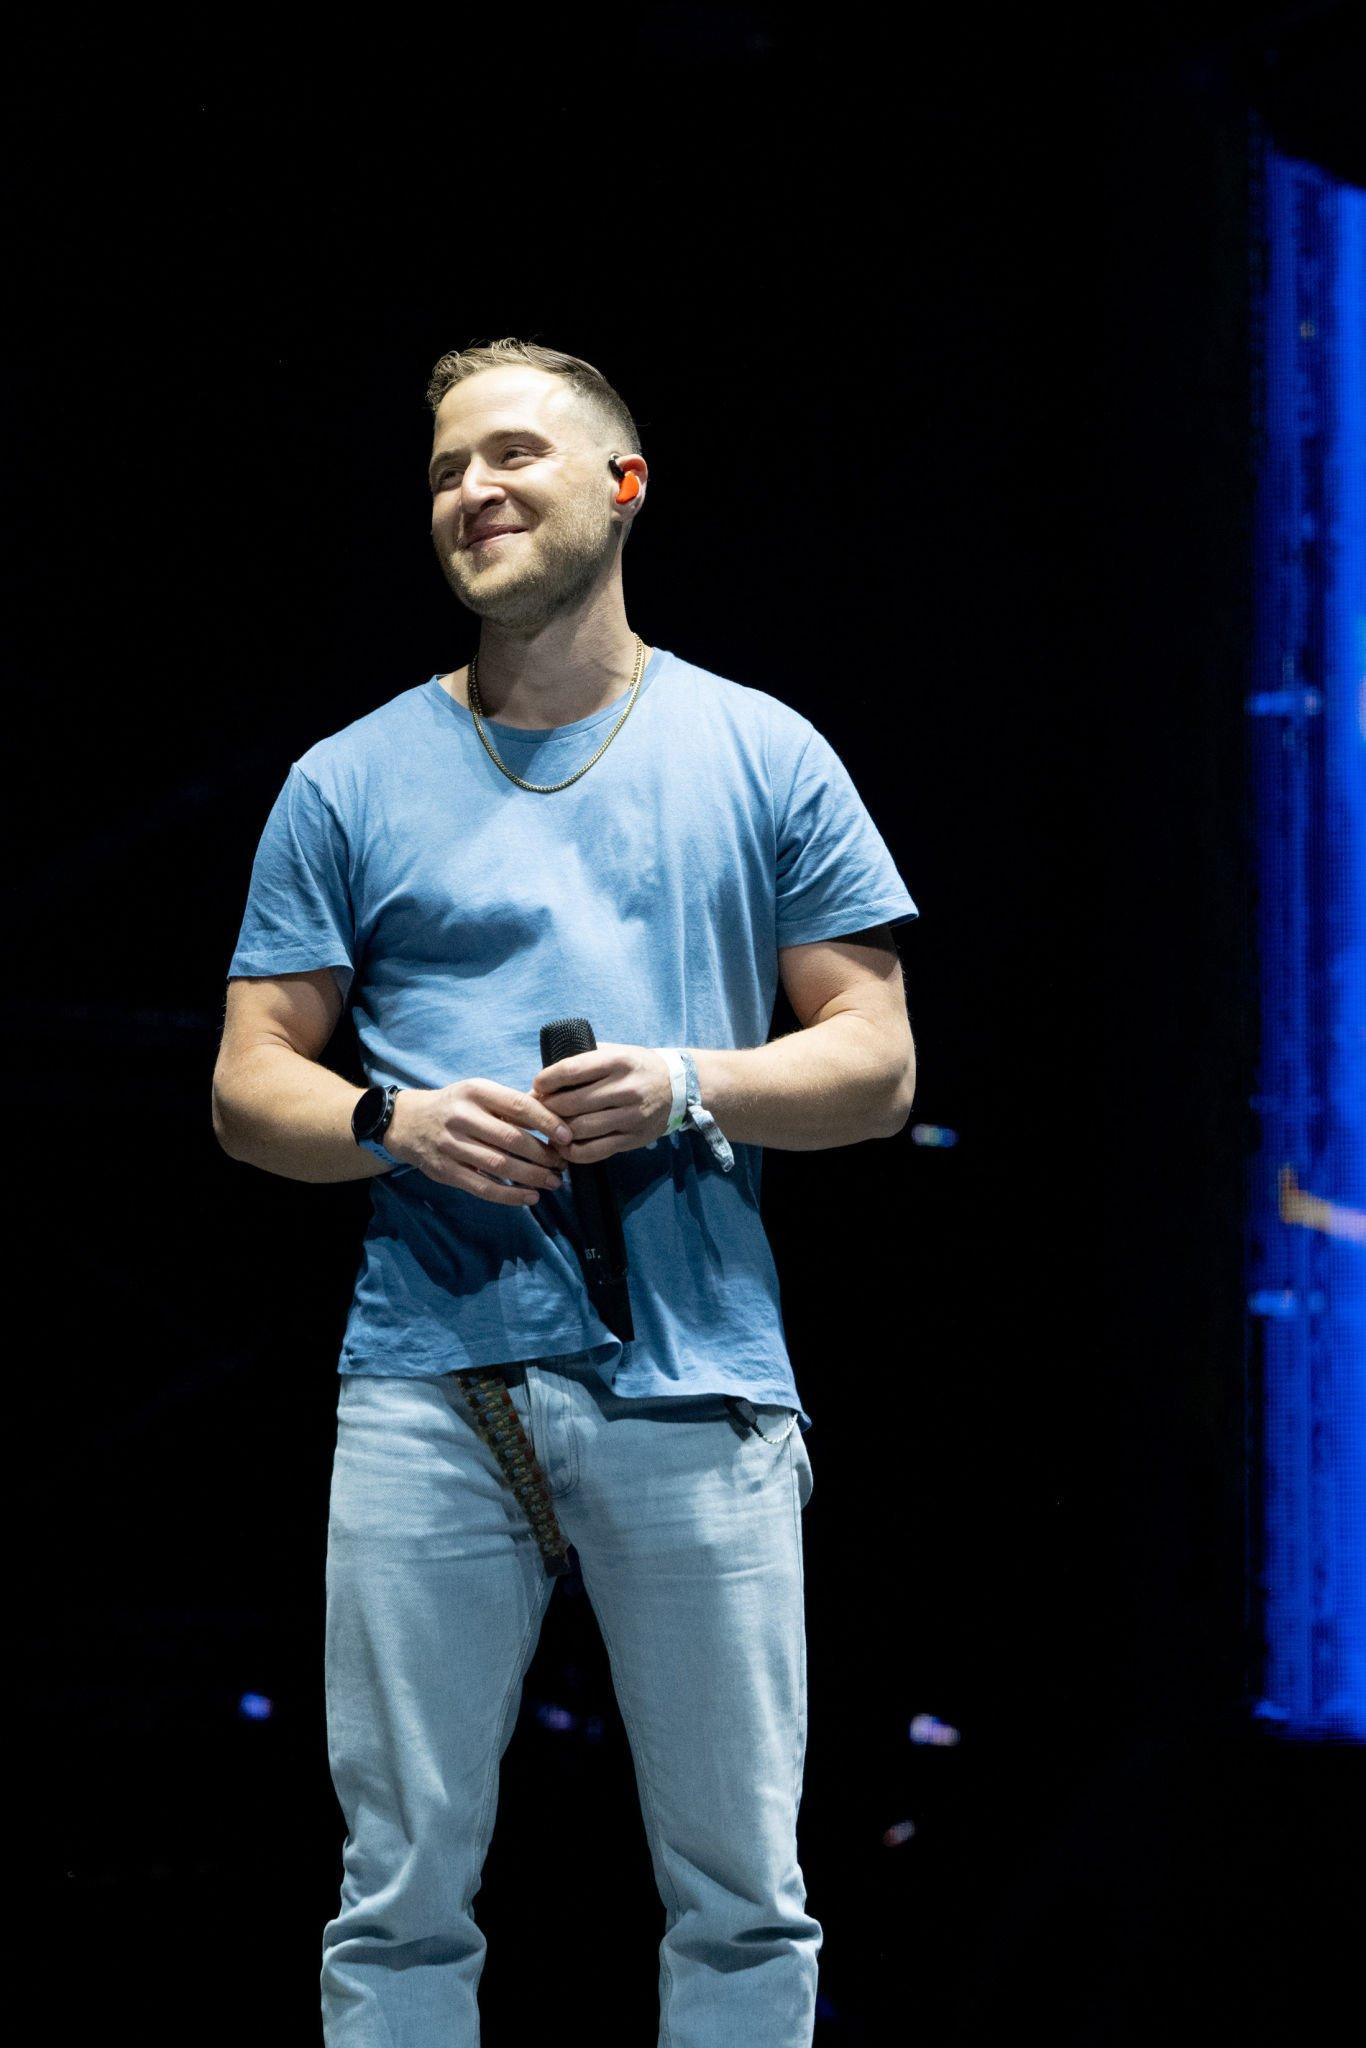 Mike Posner joins Big Sean onstage at 2022 Coachella to perform "Cooler Than Me"
